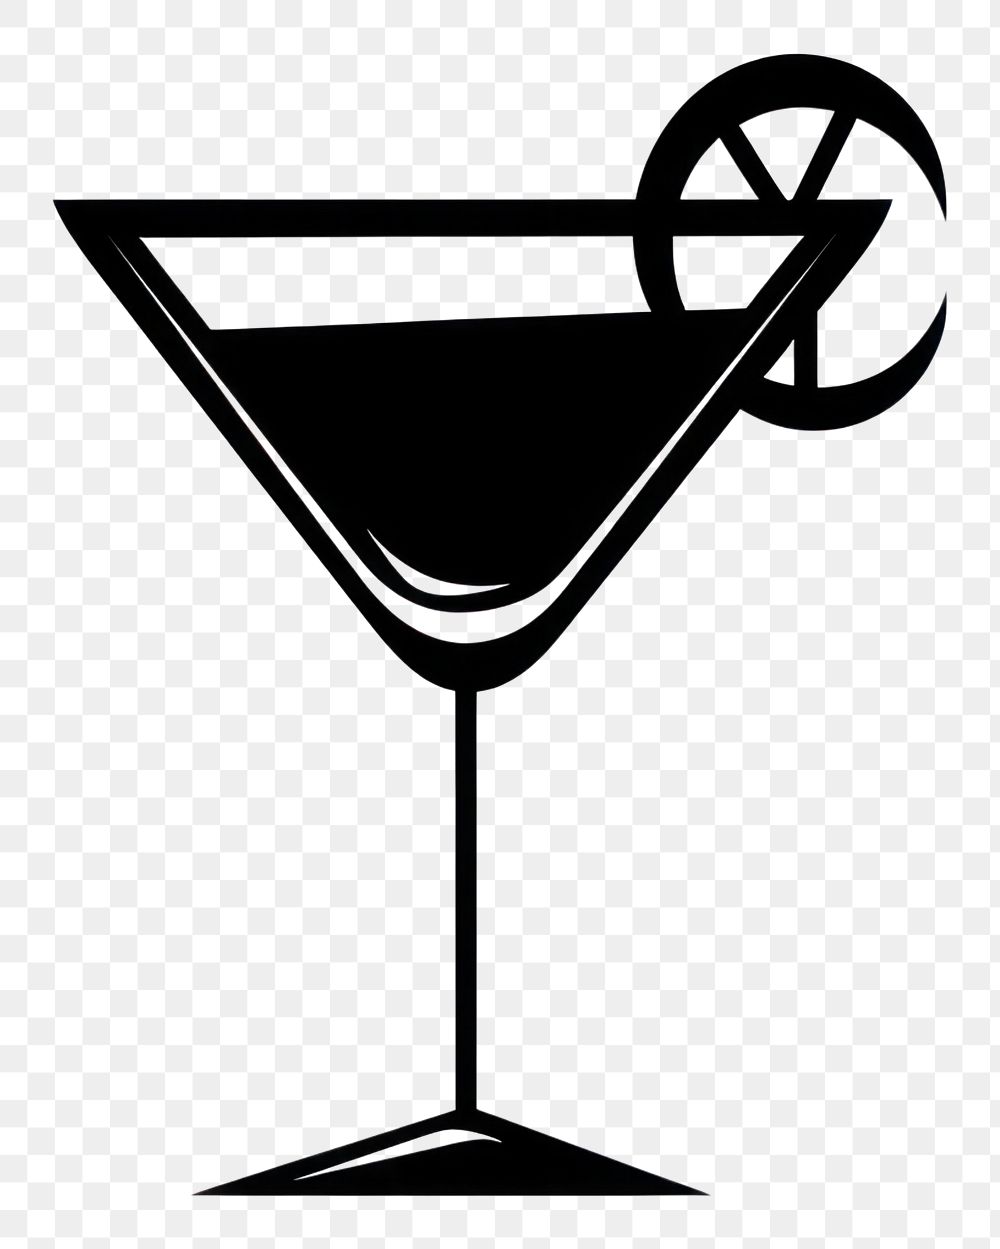 PNG Alcohol cocktail icon martini drink black.